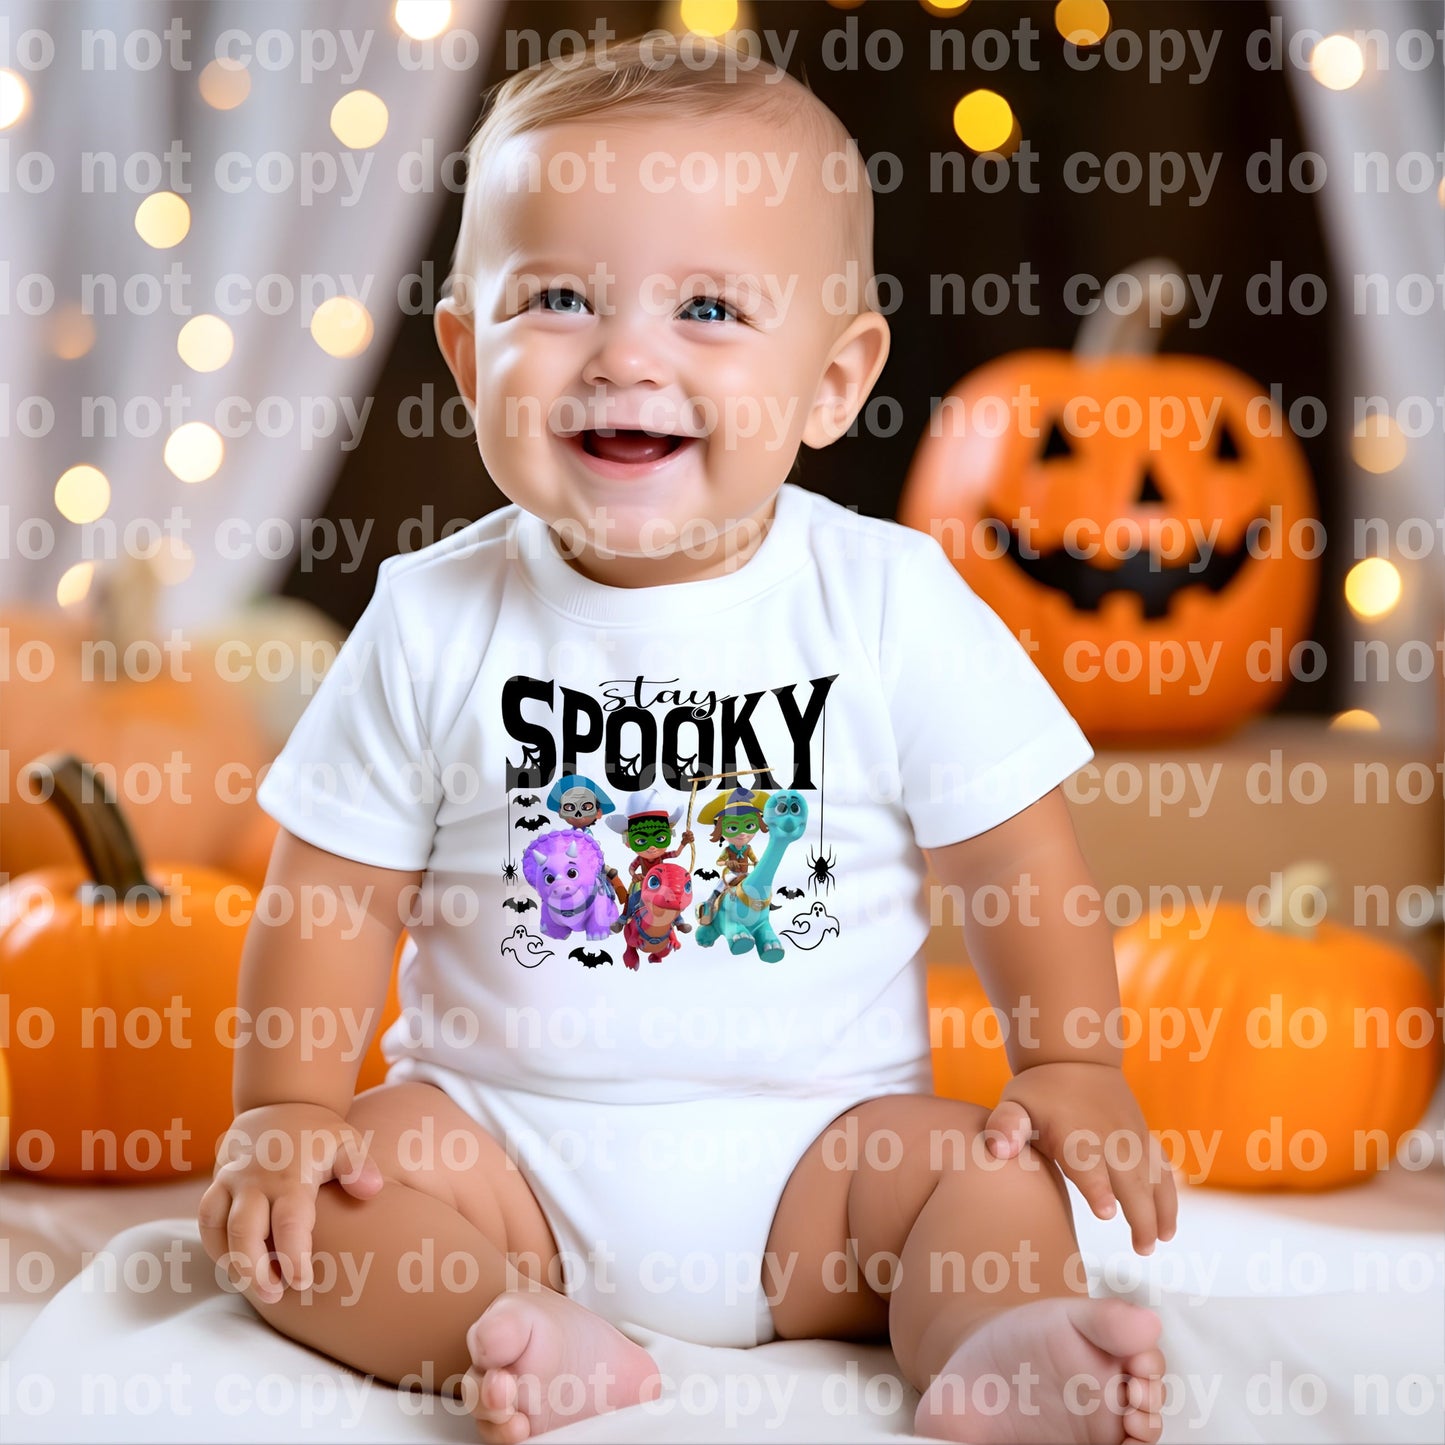 Stay Spooky Kids Dinosaurs Dream Print or Sublimation Print